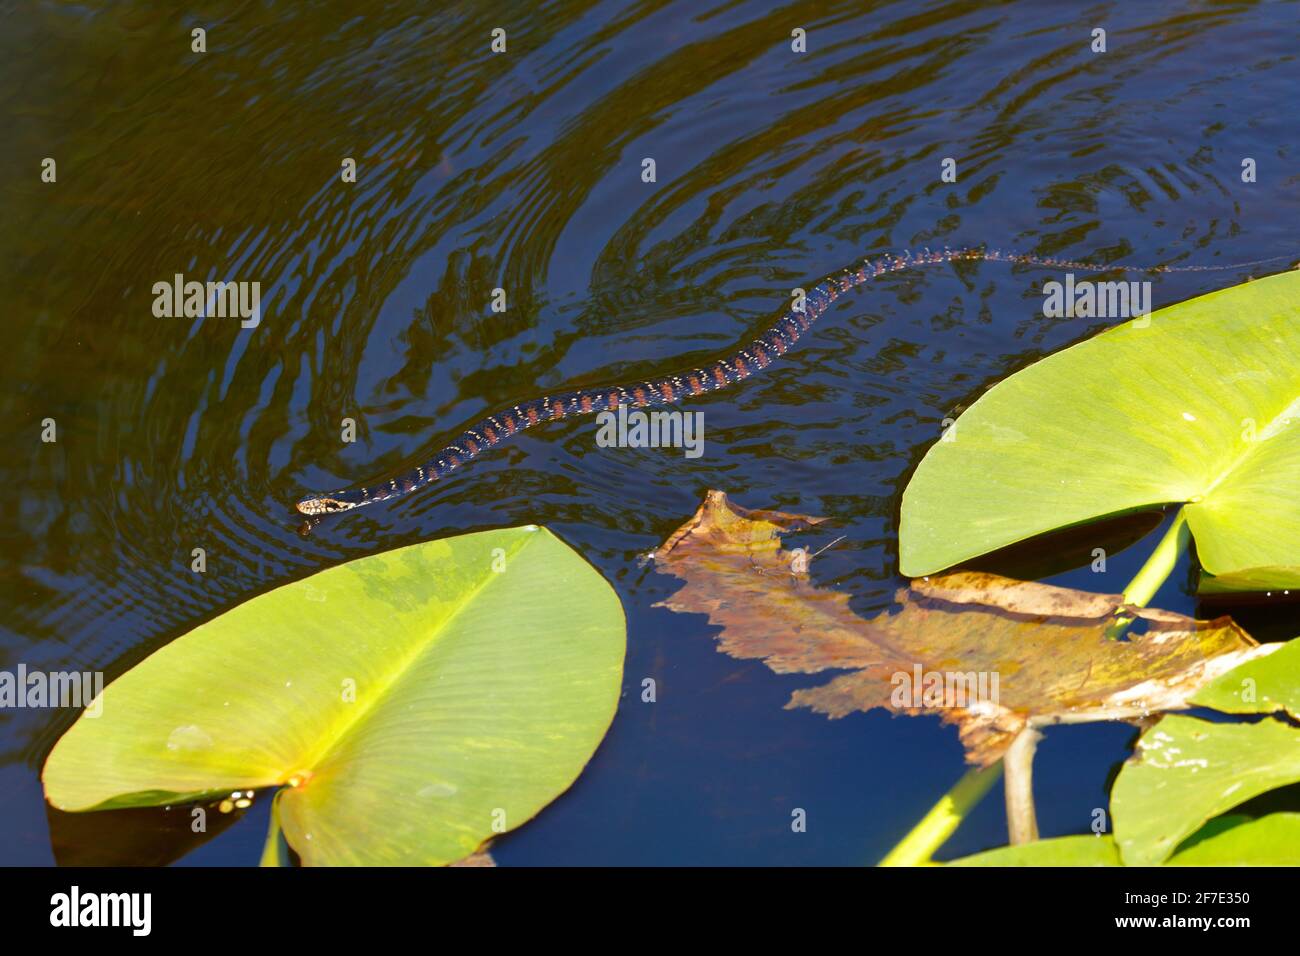 a Florida banded water snake, Nerodia fasciata pictiventris, foraging in a swamp. Stock Photo